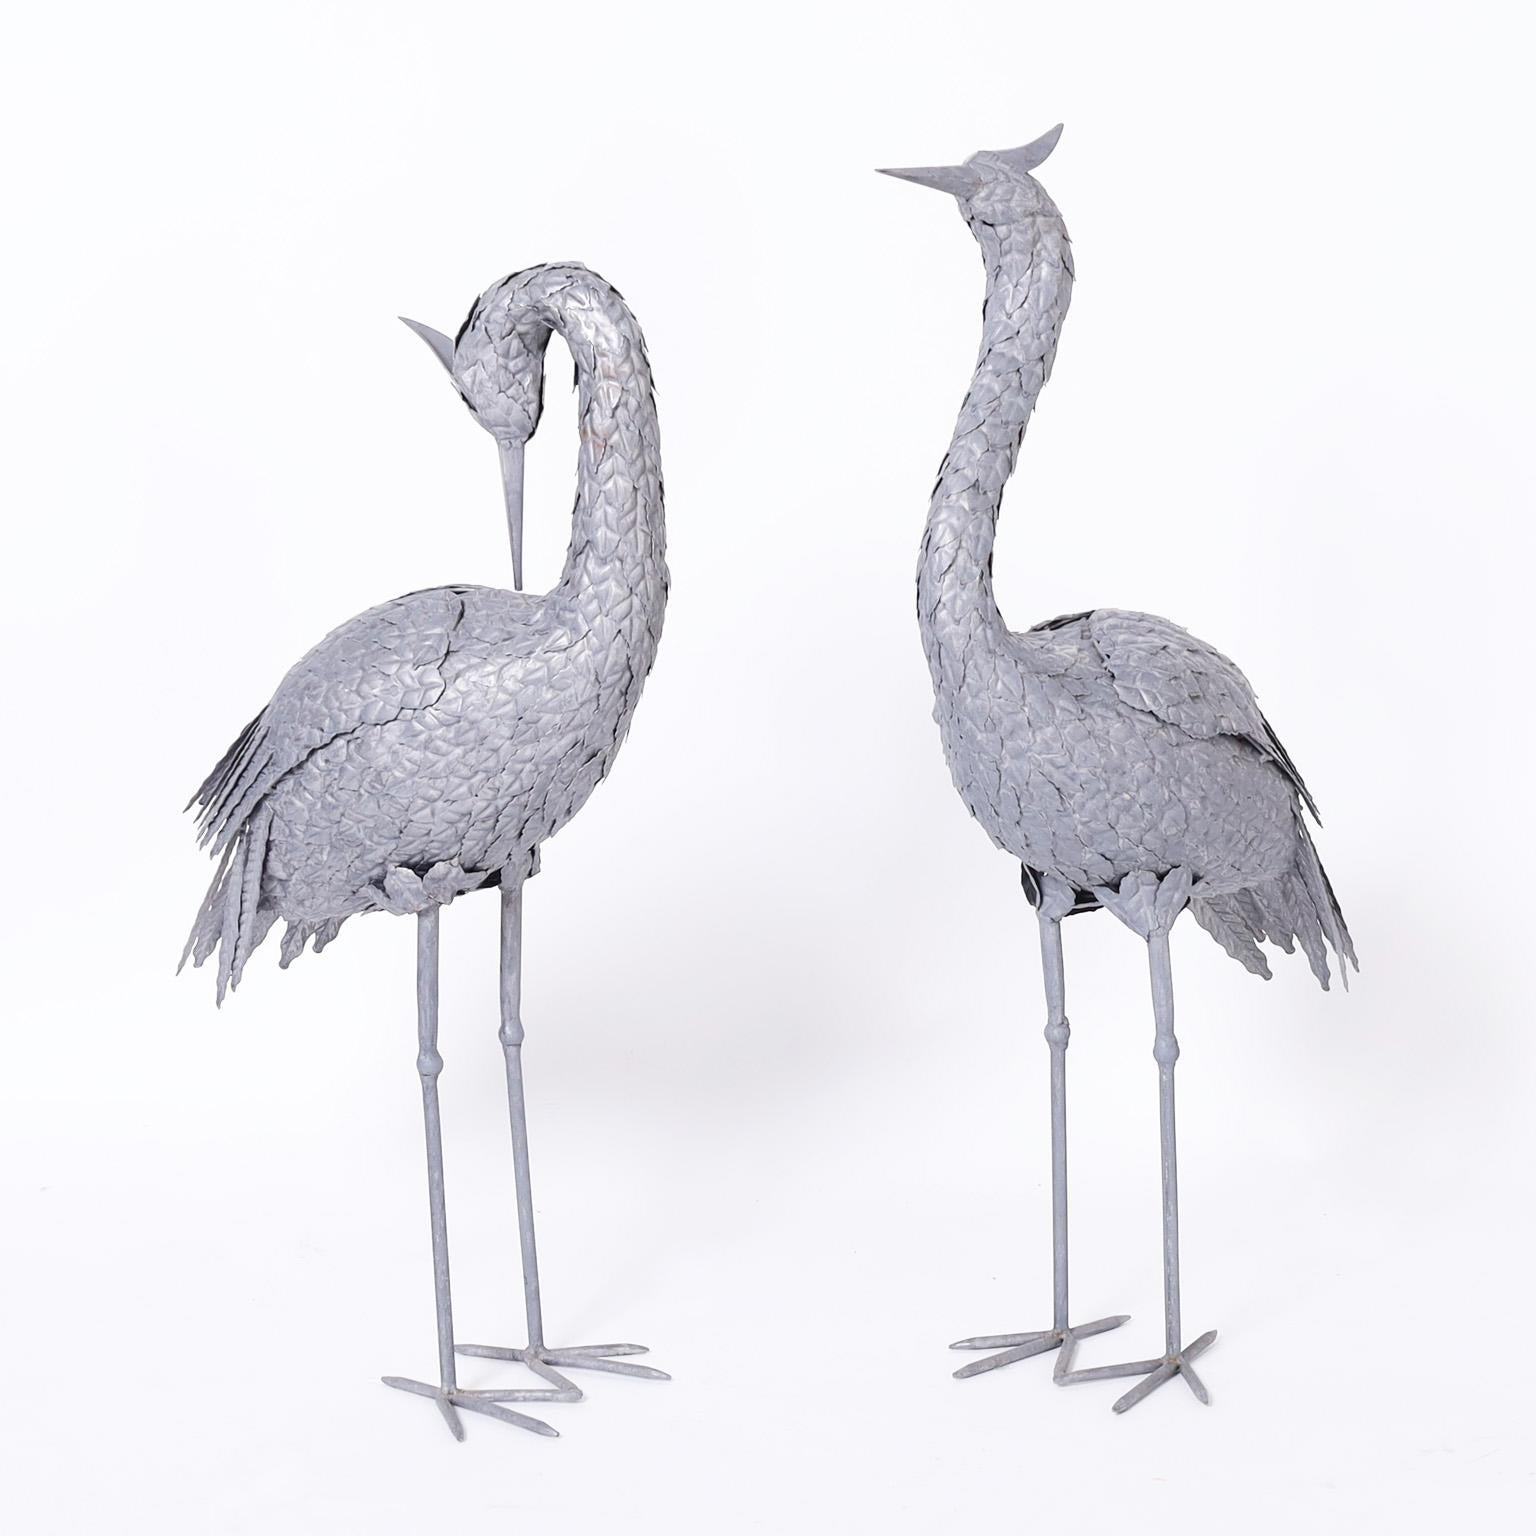 Standup pair of life size mid century cranes hand crafted in metal, each with its own familiar stance and chic raw metal finish.

Left H: 29 W: 17 D: 7
Right H: 32 W: 20 D: 7